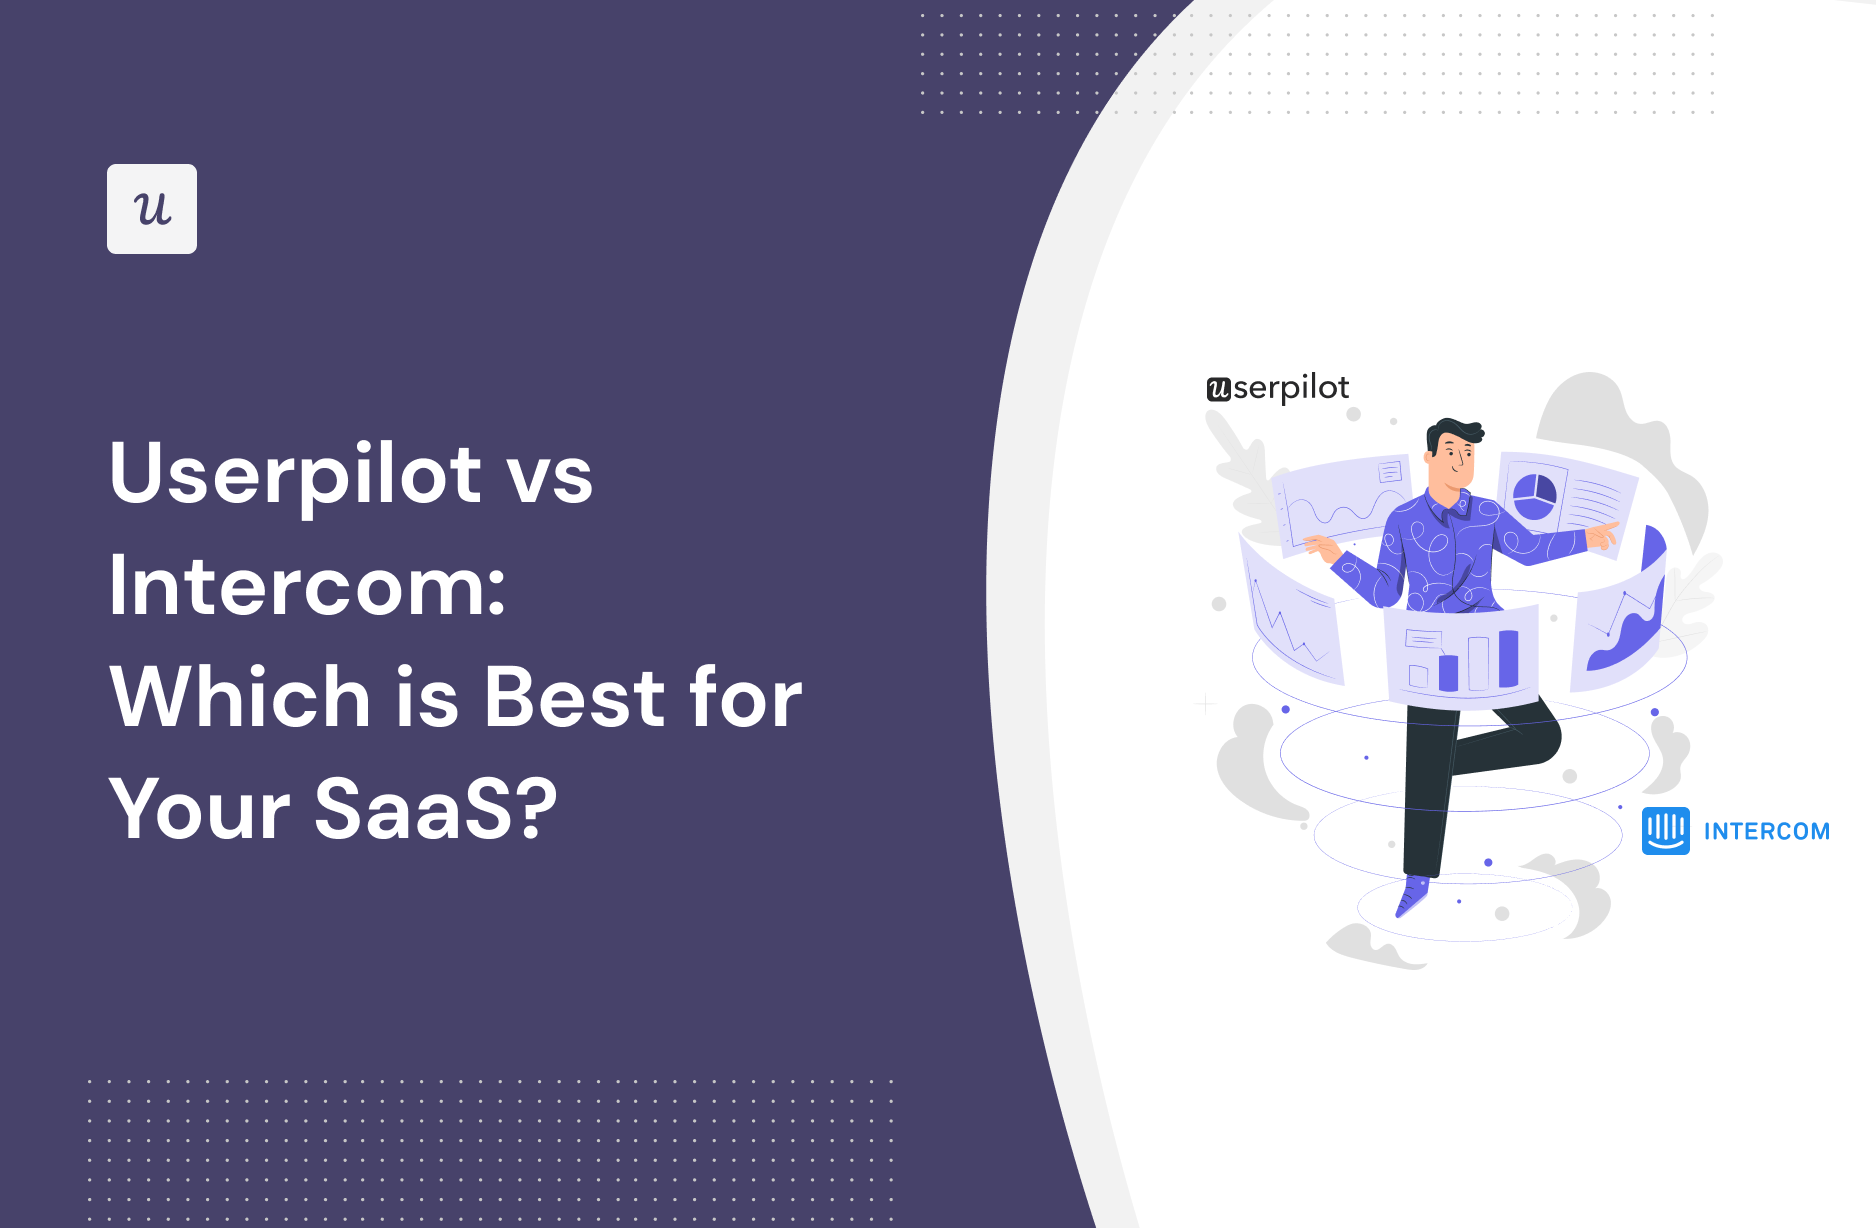 Userpilot vs Intercom: Which Is Best for Your SaaS?